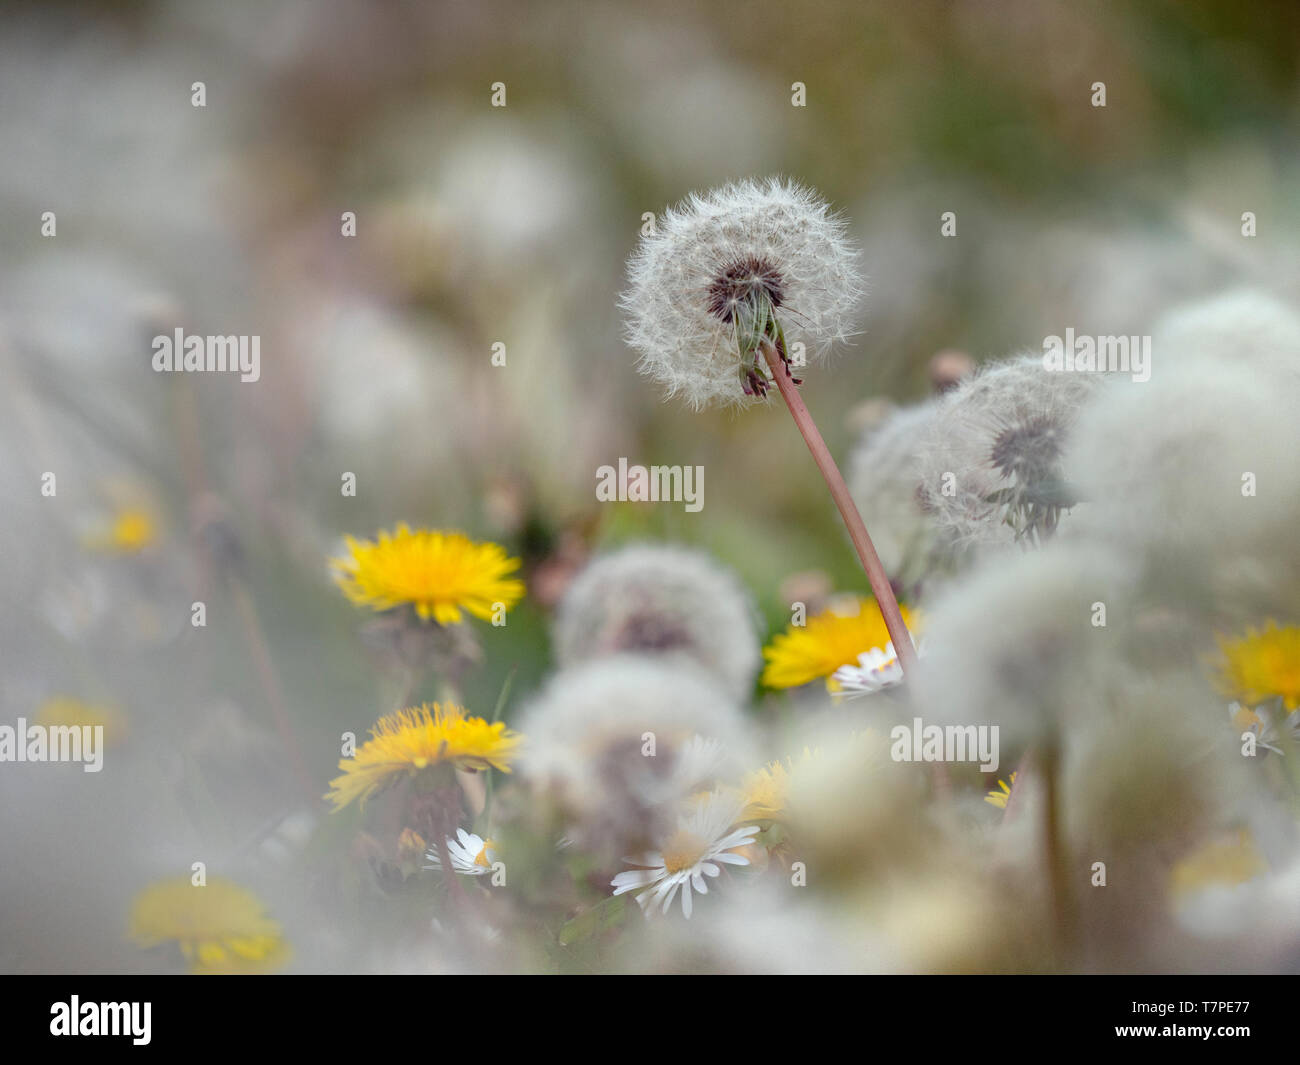 Dandelion Taxaxacum officinale seed heads and flowers Stock Photo